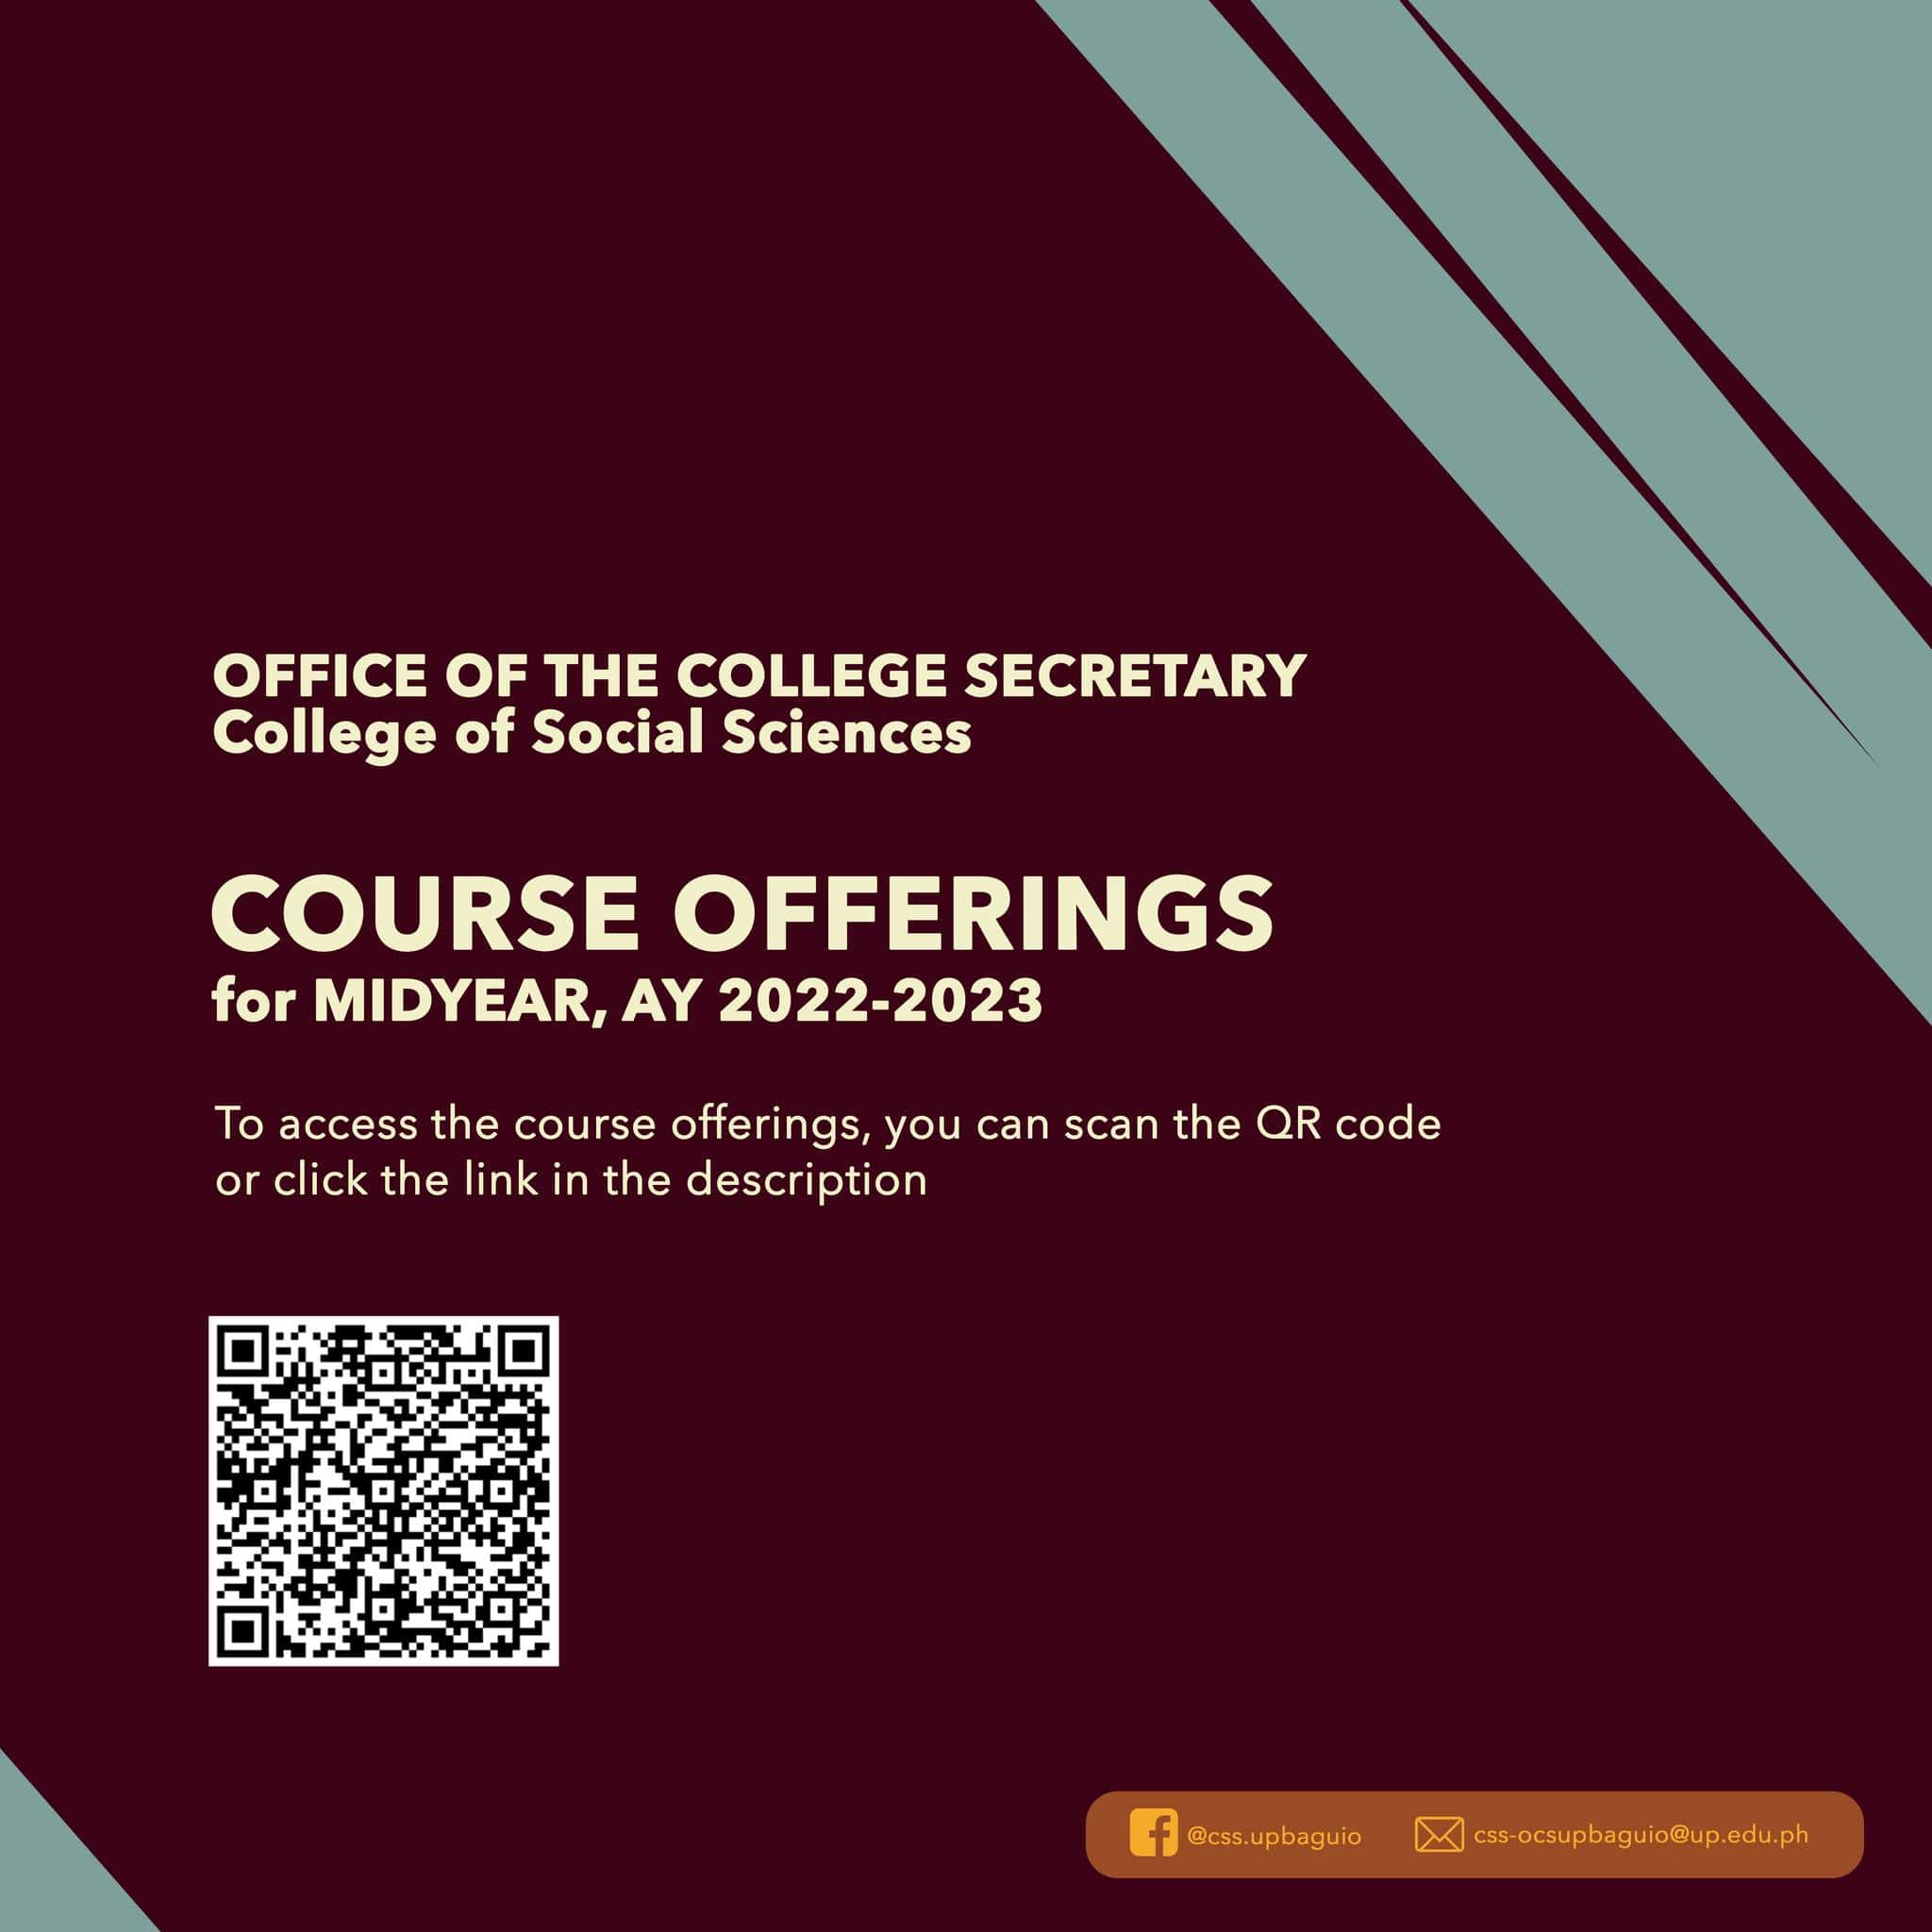 Course Offerings for MIDYEAR AY 2022-2023.